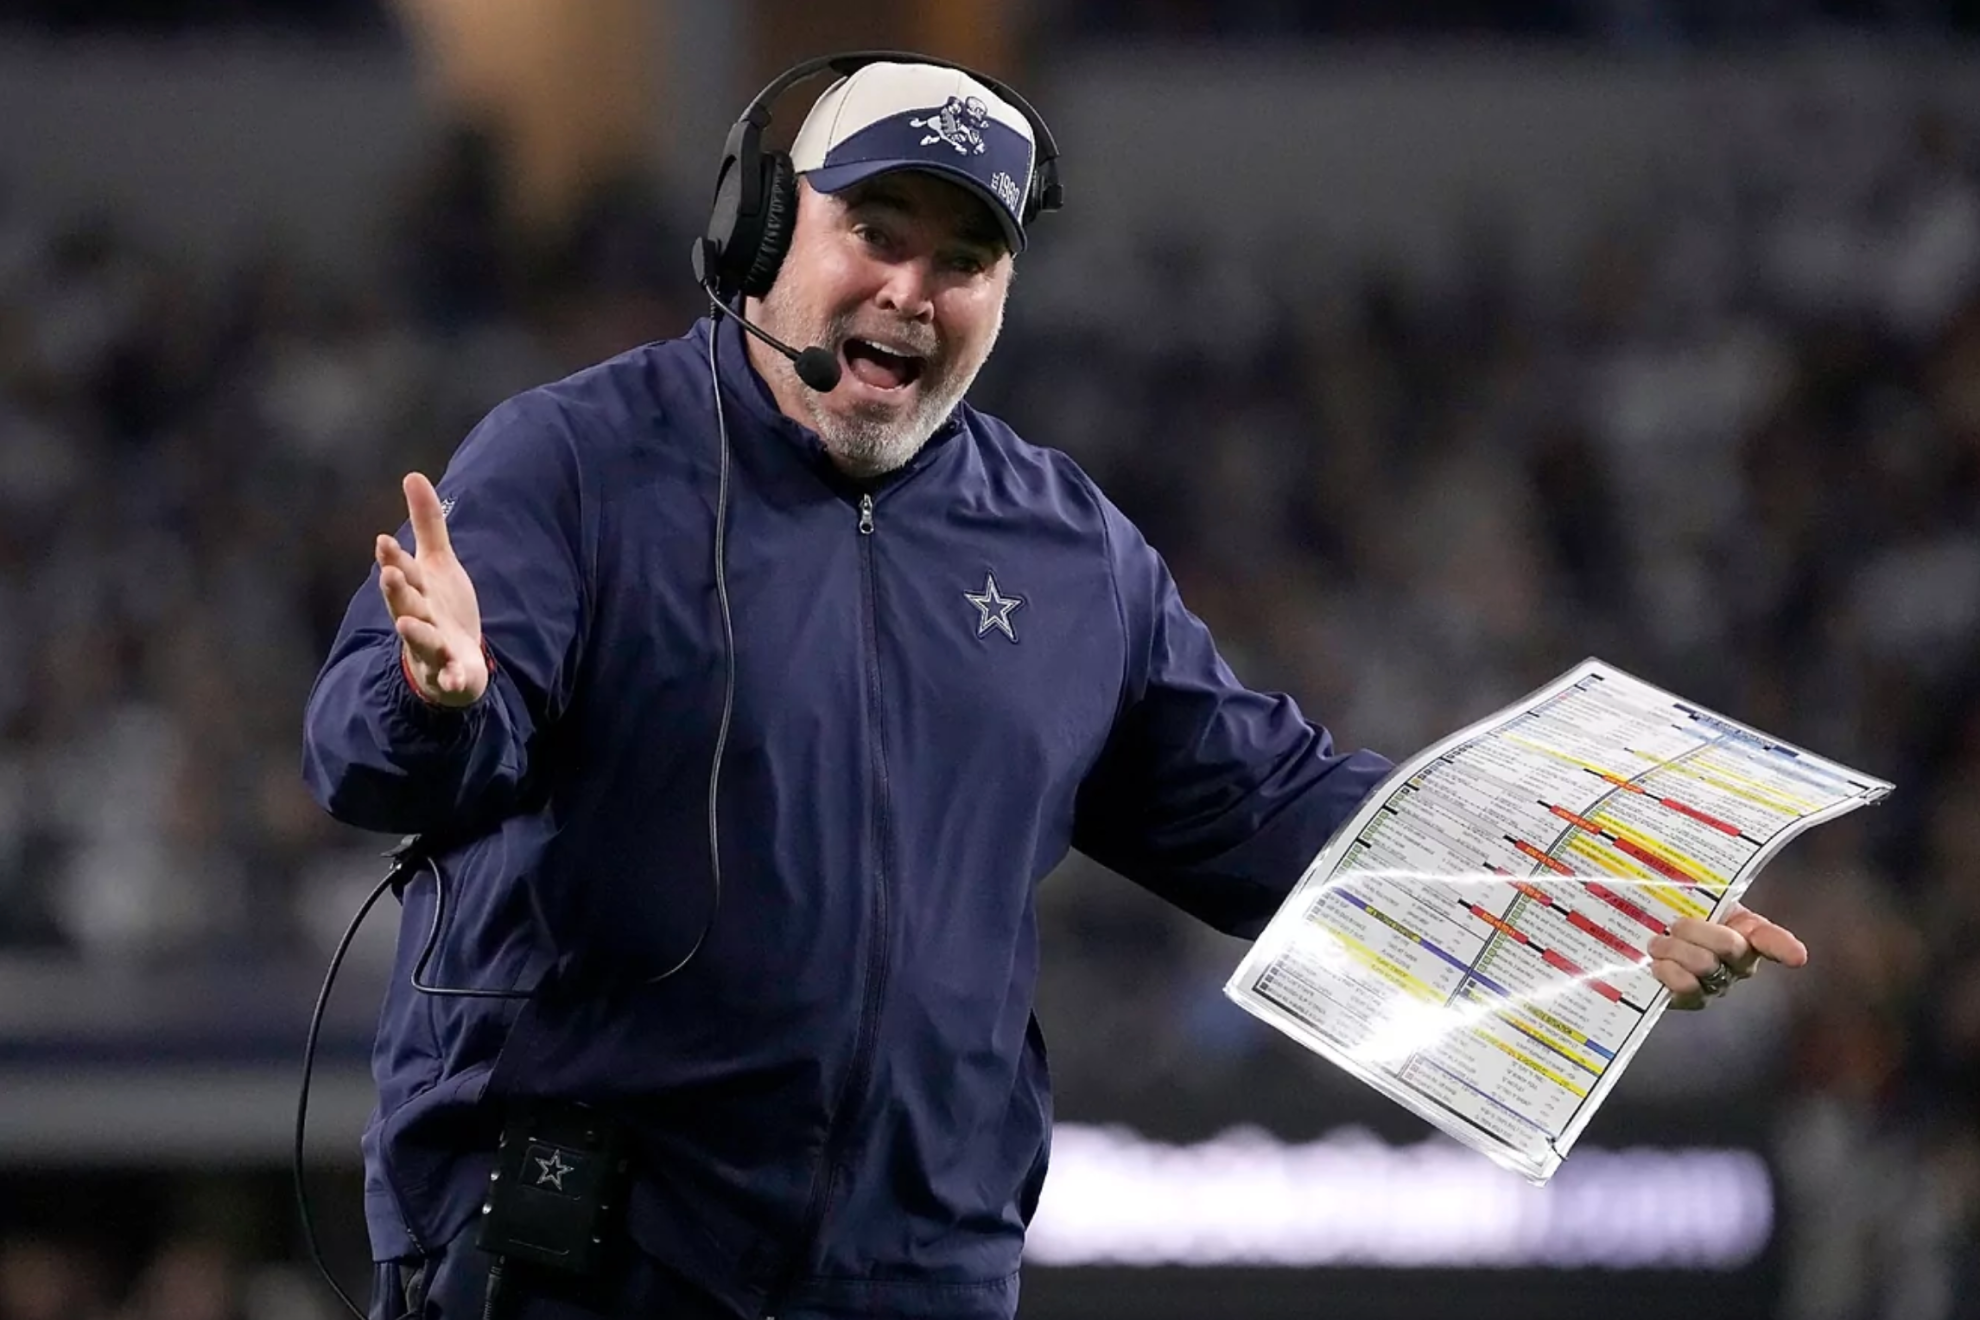 Mike McCarthy scores first touchdown in Eagles vs Cowboys game after suffering appendicitis